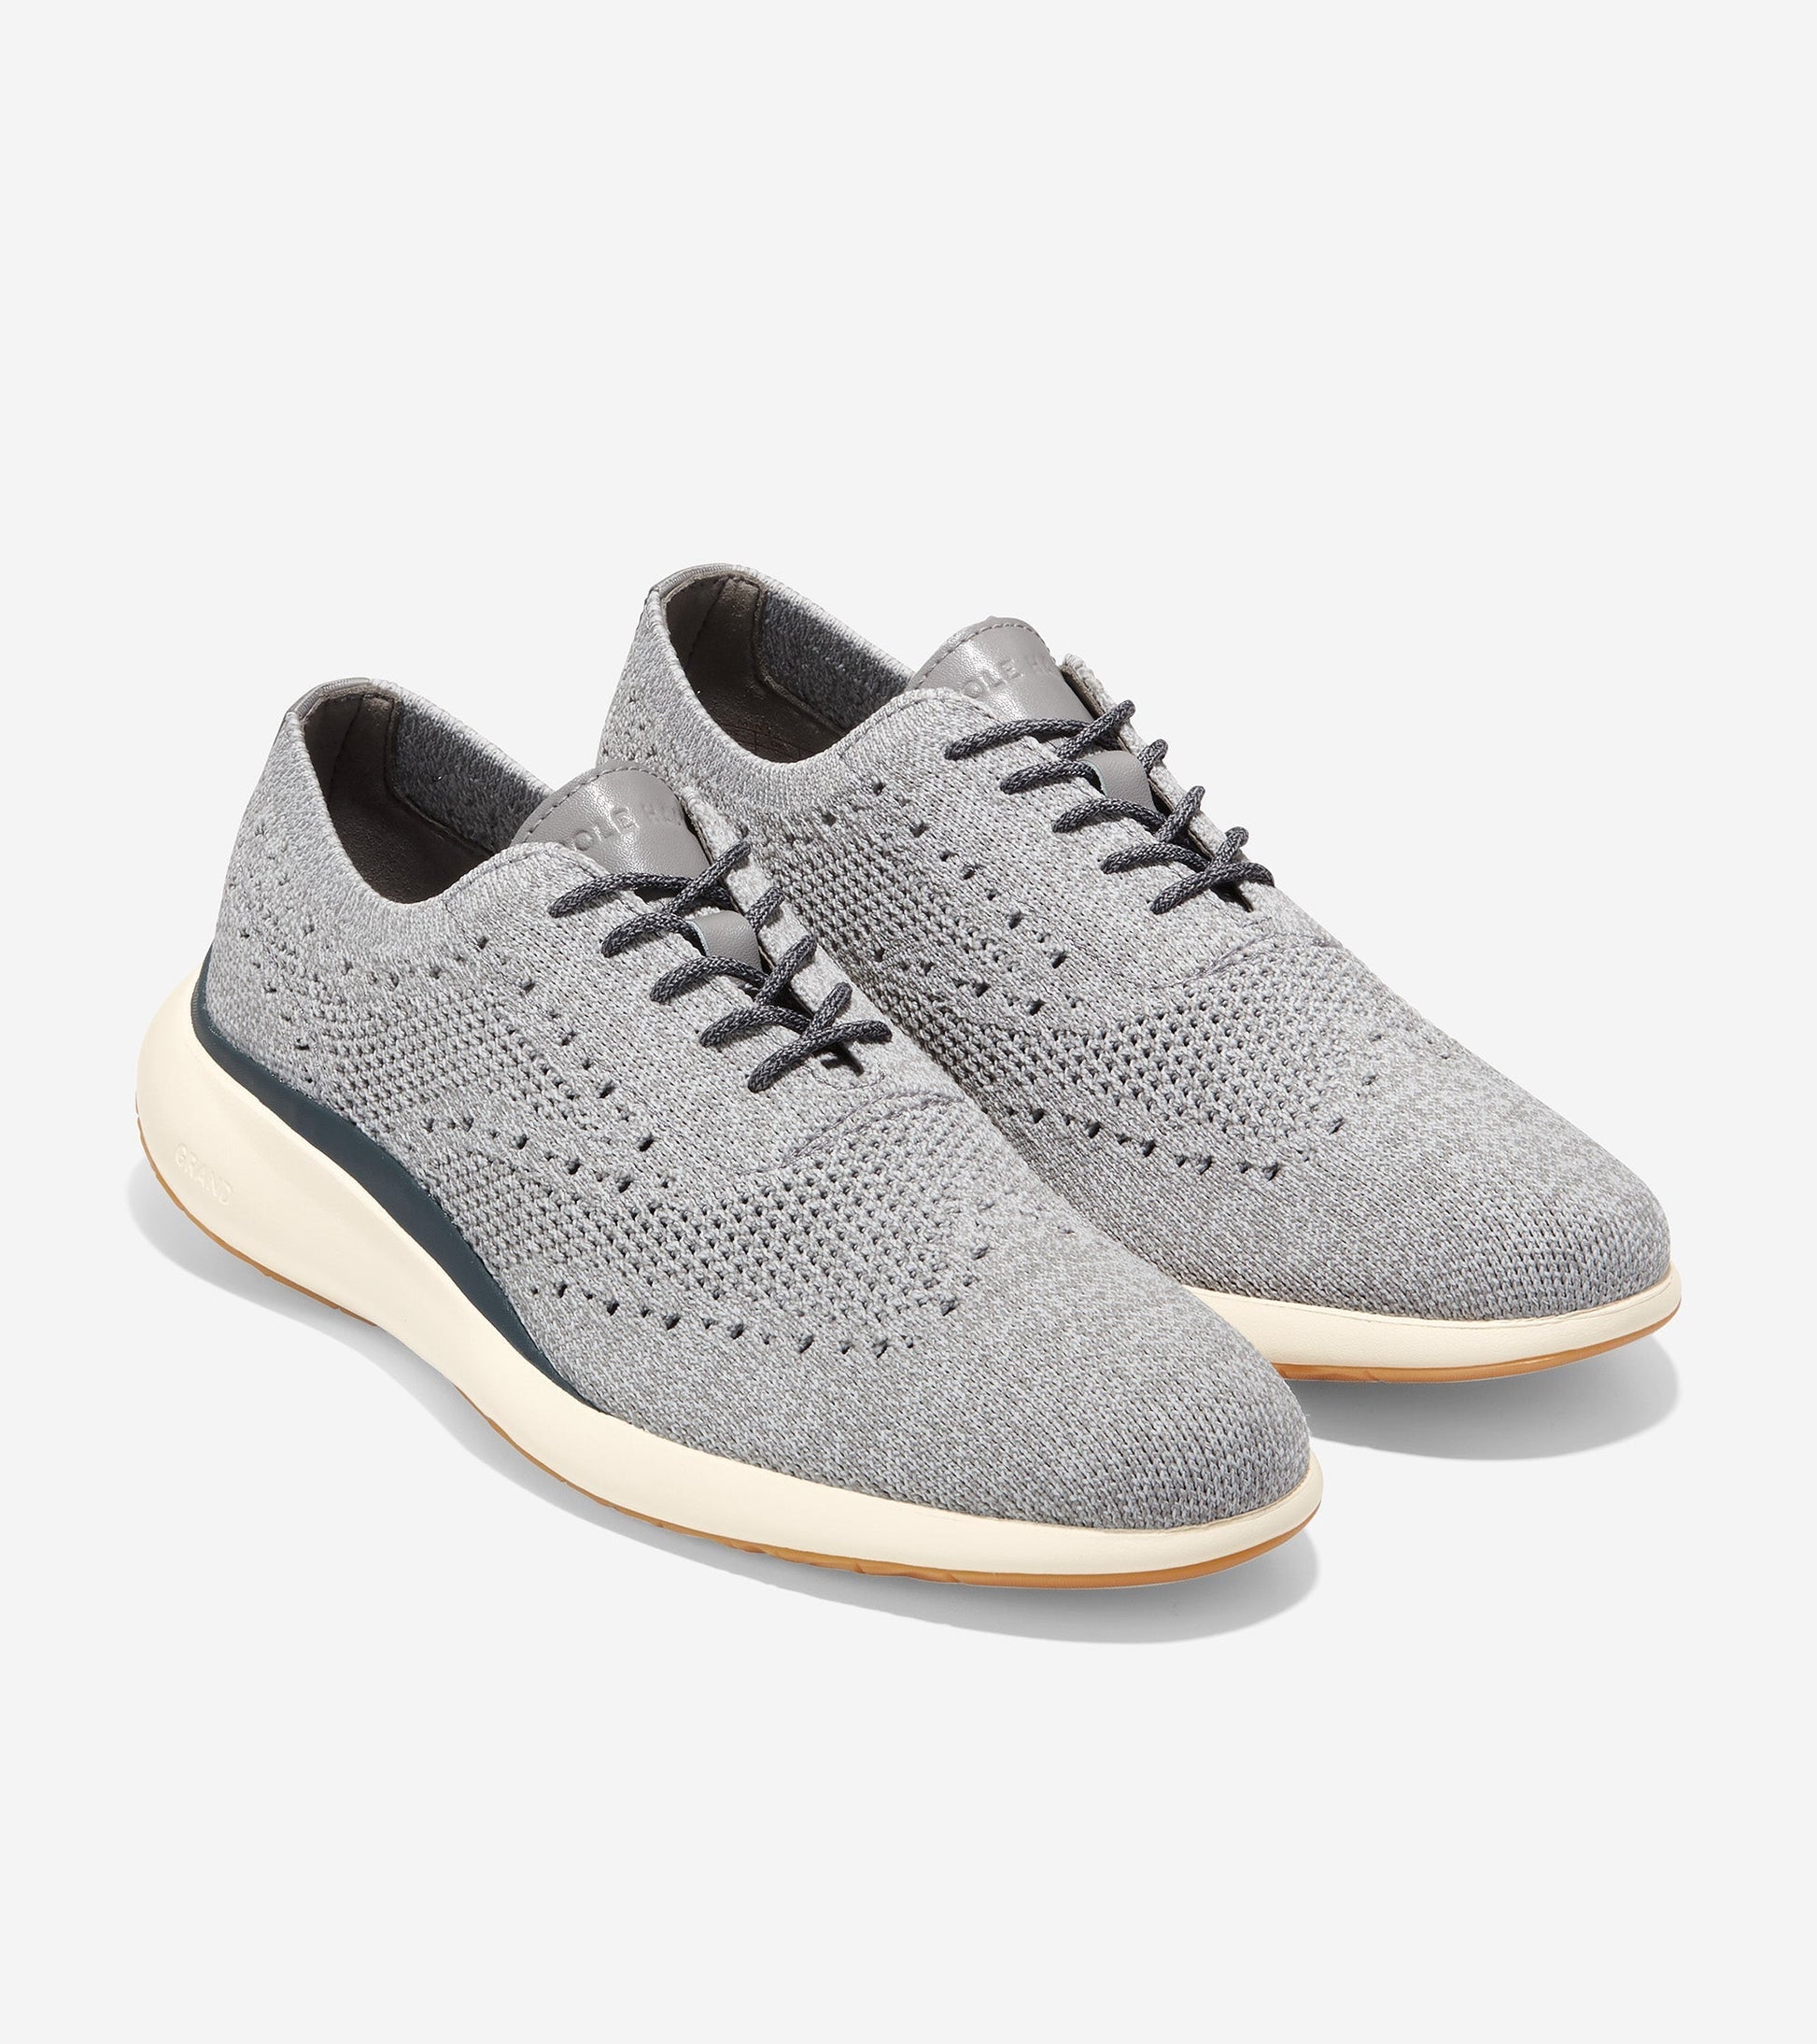 Grand Troy Wingtip Oxford - Cole Haan Germany